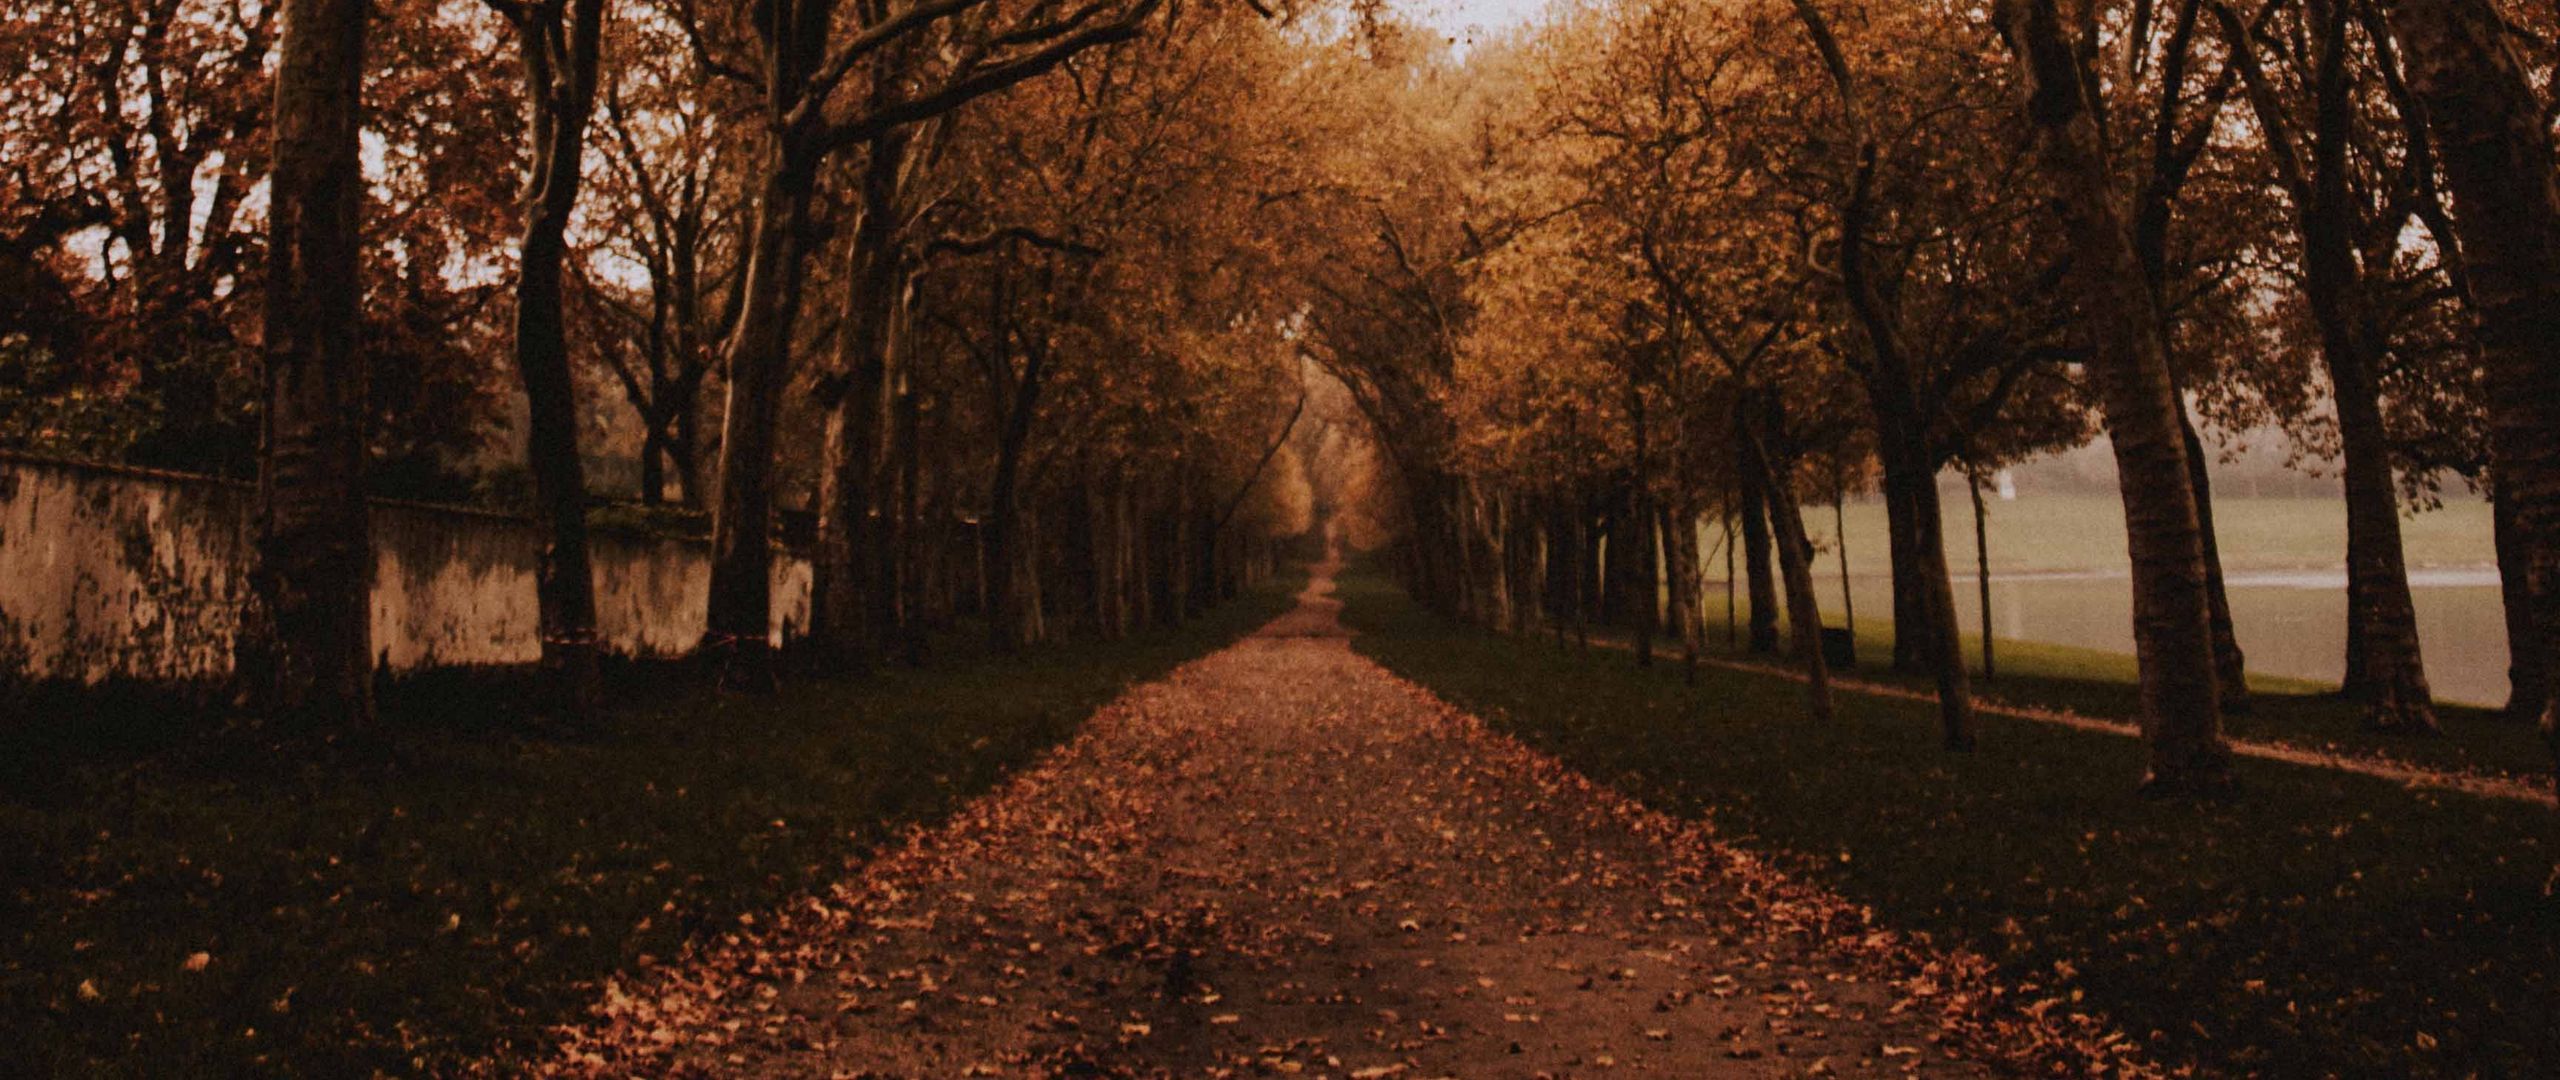 Download wallpaper 2560x1080 park, path, trees, alley, autumn dual wide 1080p HD background